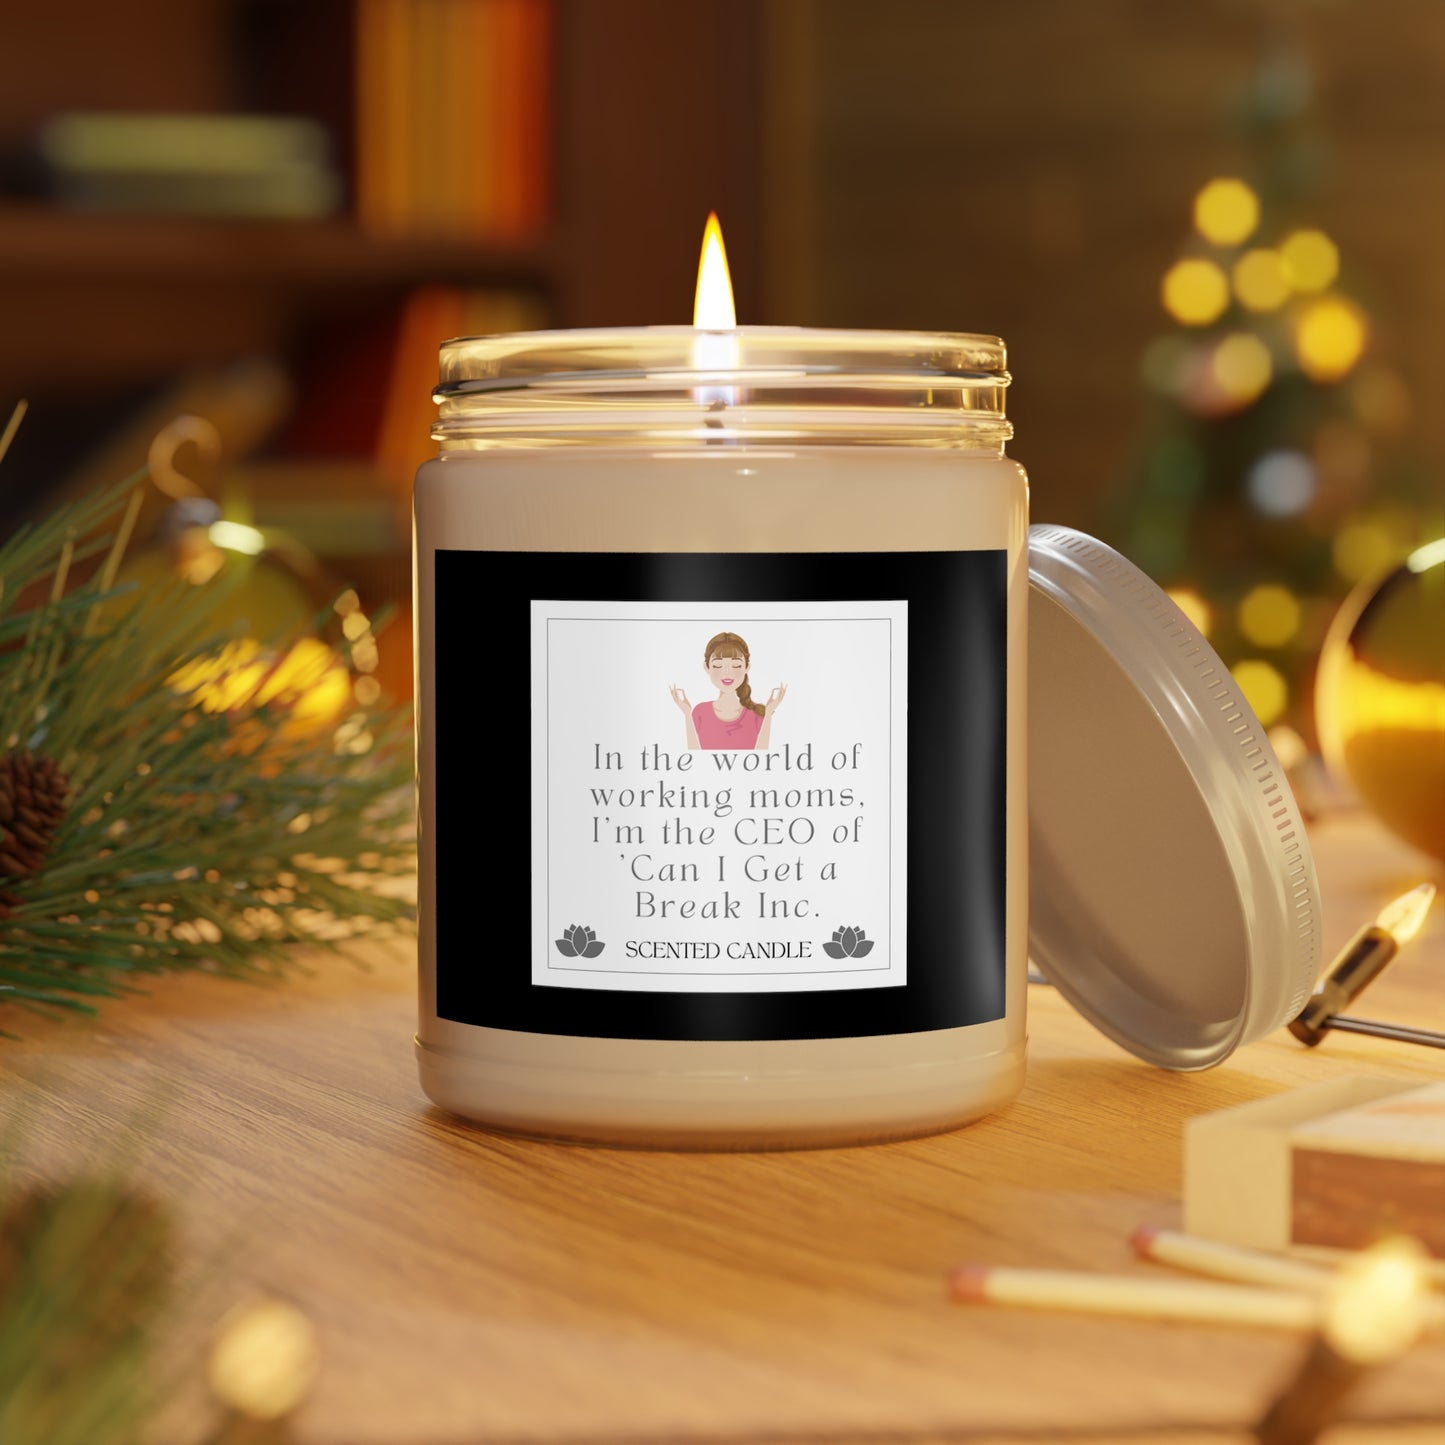 In the world of working moms, I'm the CEO of 'Can I Get a Break Inc. Scented Candles, 9oz